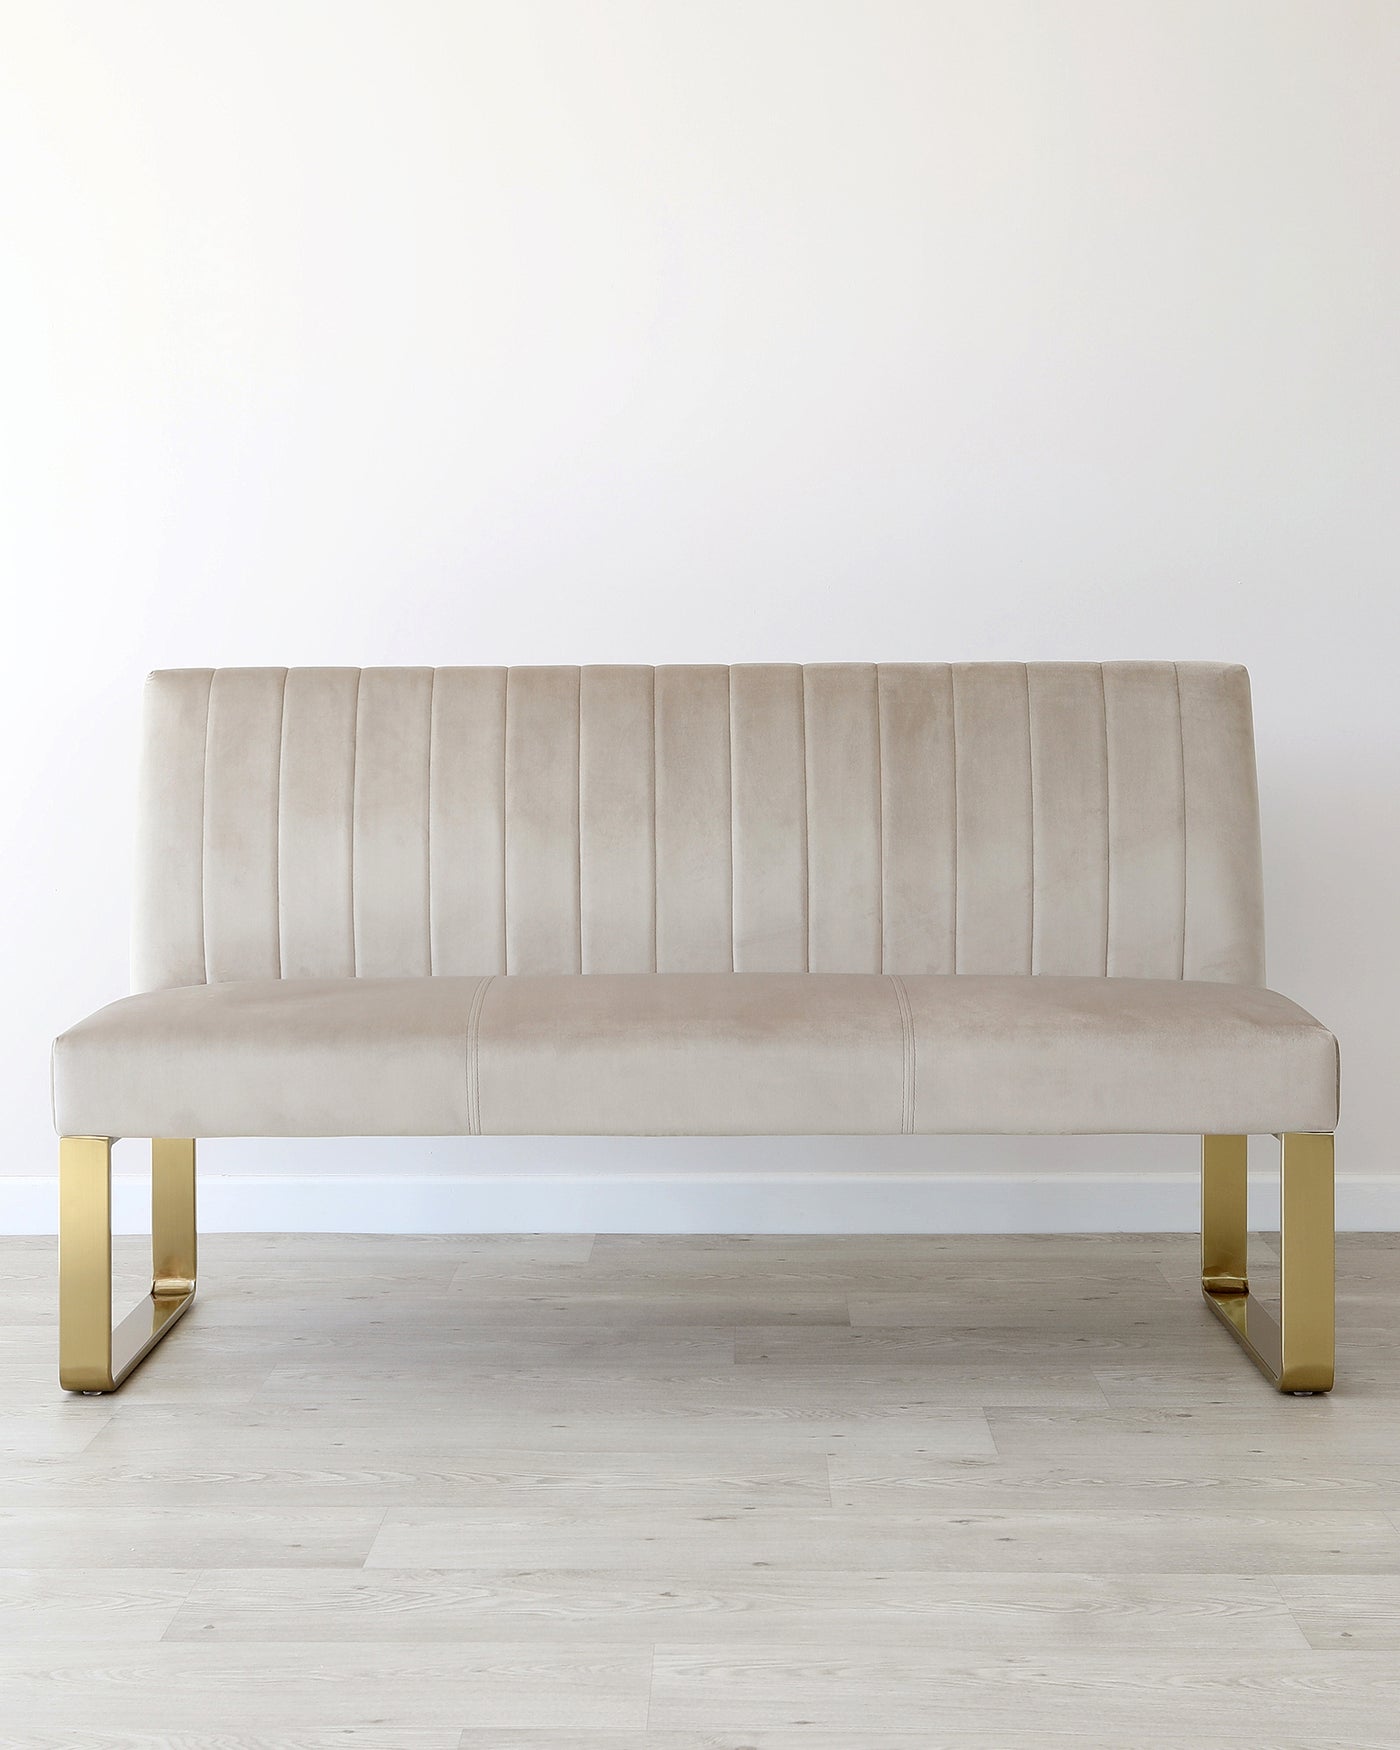 Ophelia 3 Seater Champagne Velvet & Brass Bench With Backrest